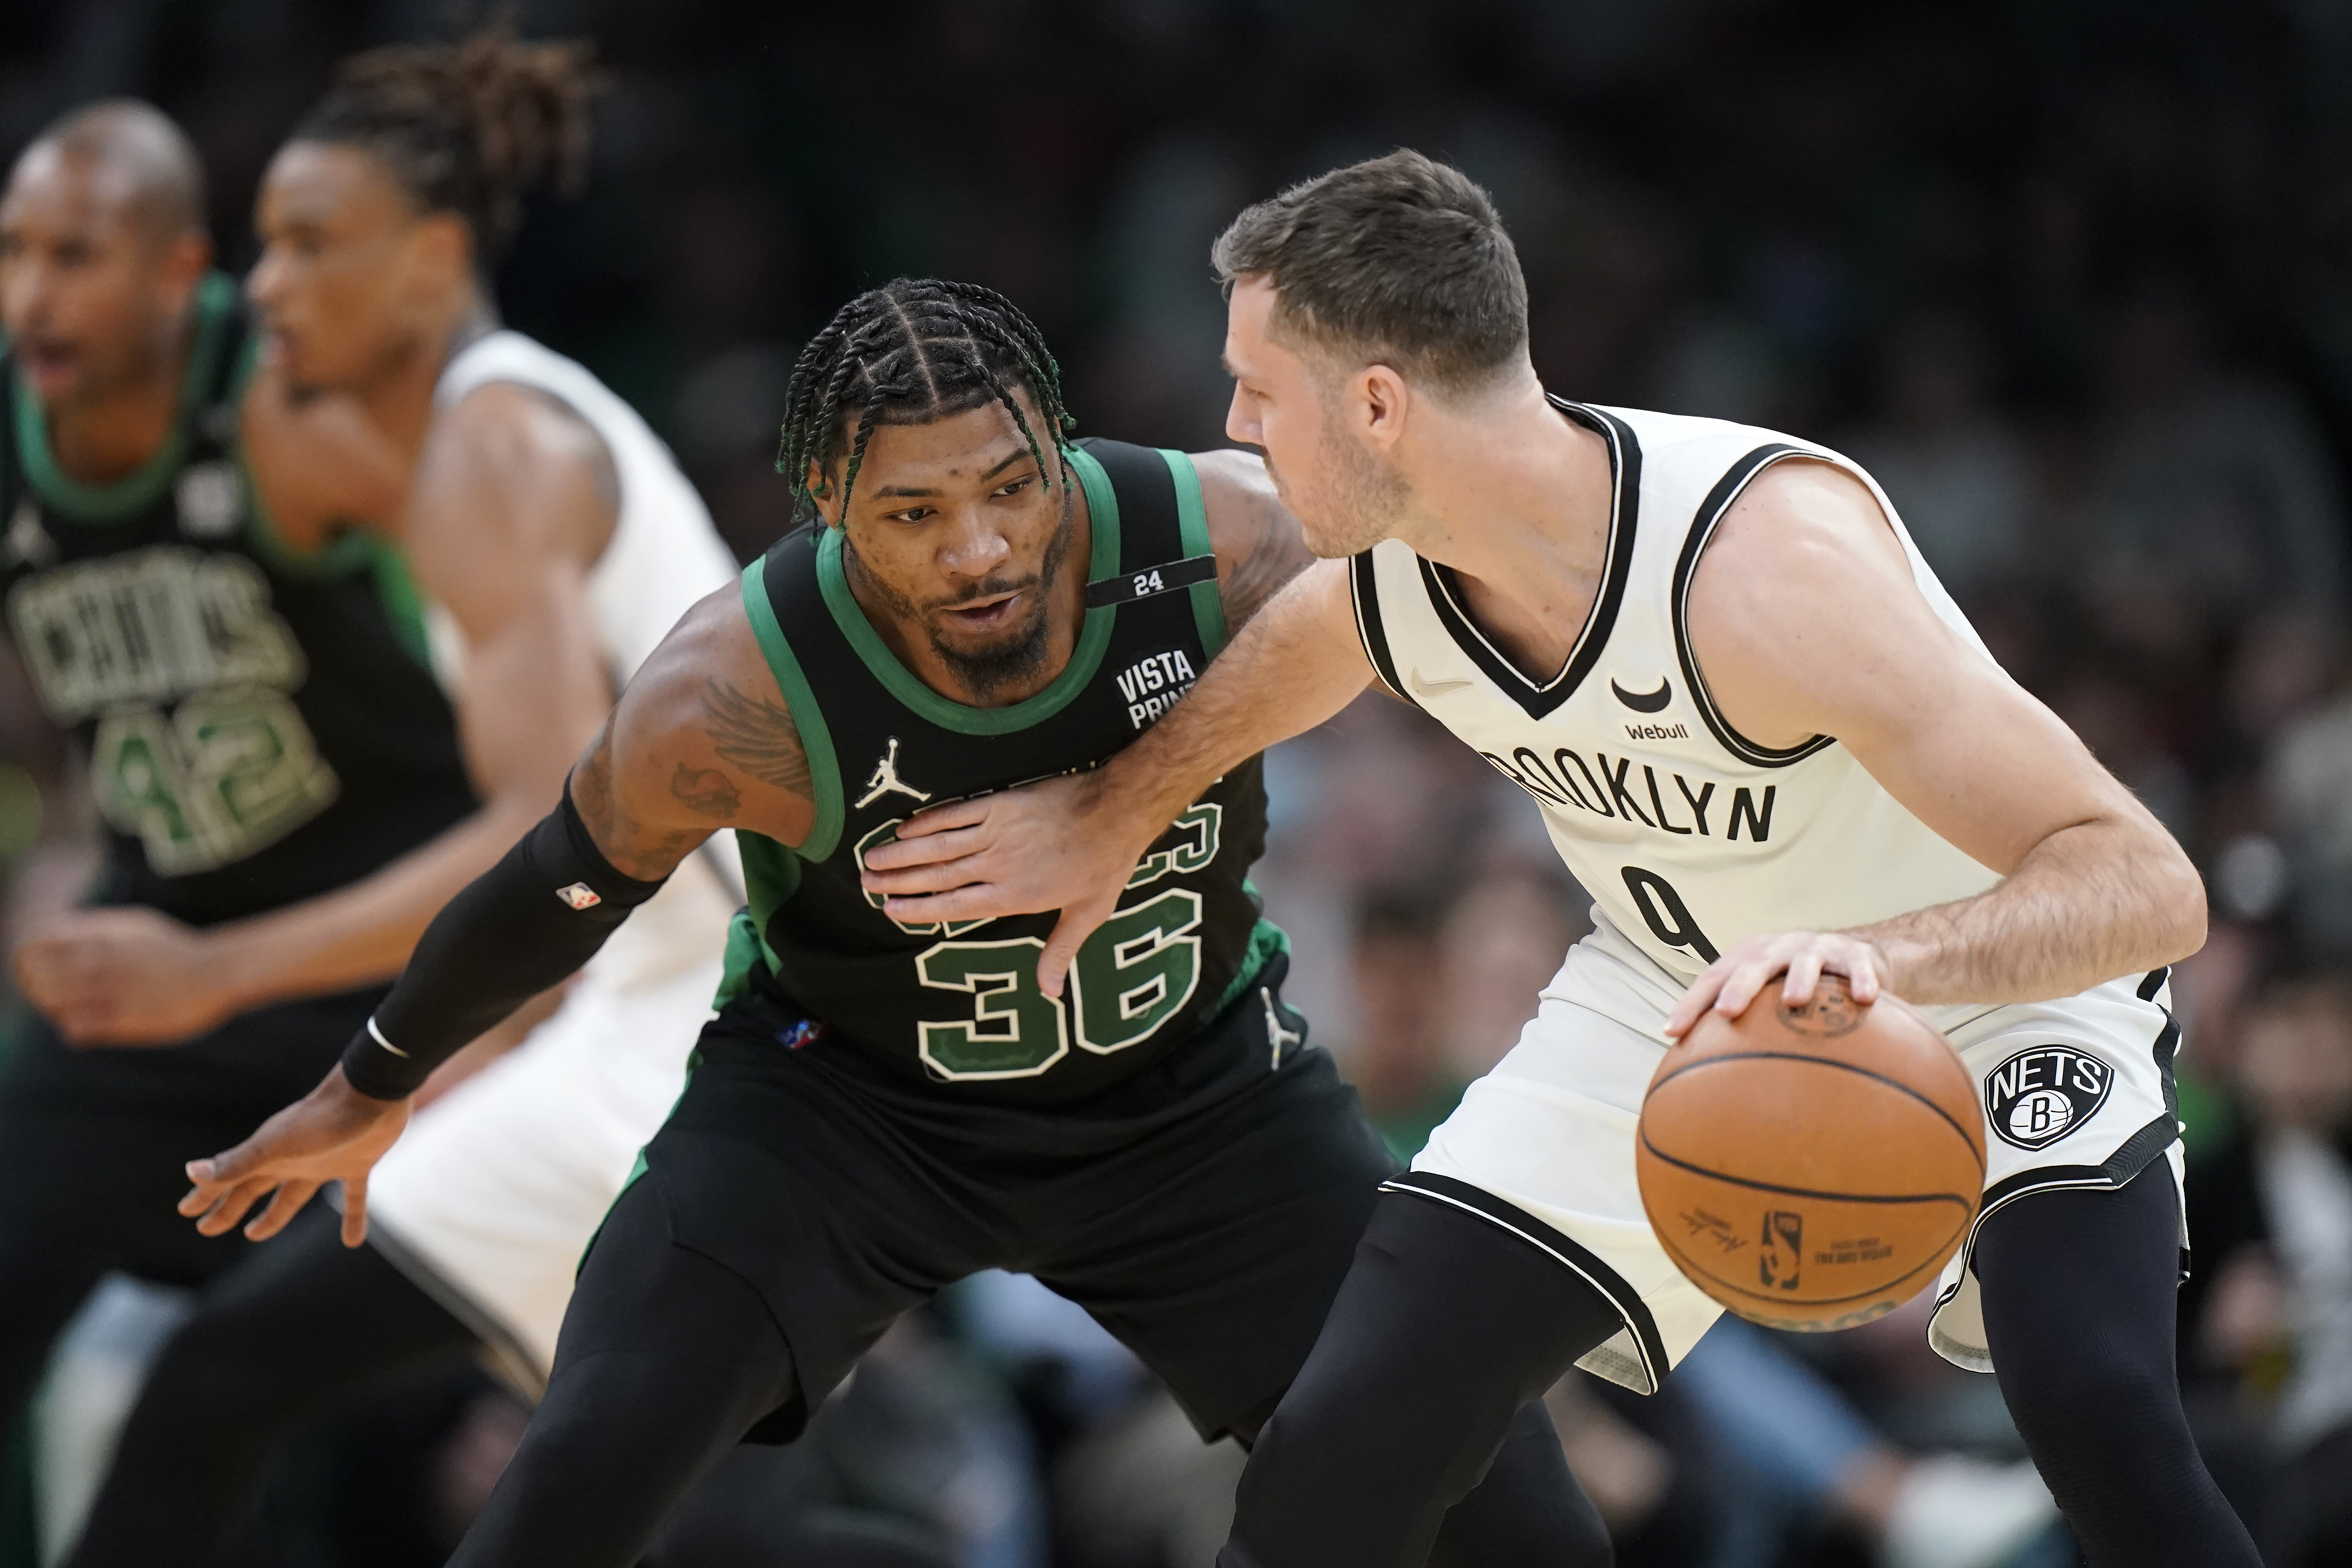 Best Highlights of 2019-20 (so far): Marcus Smart 